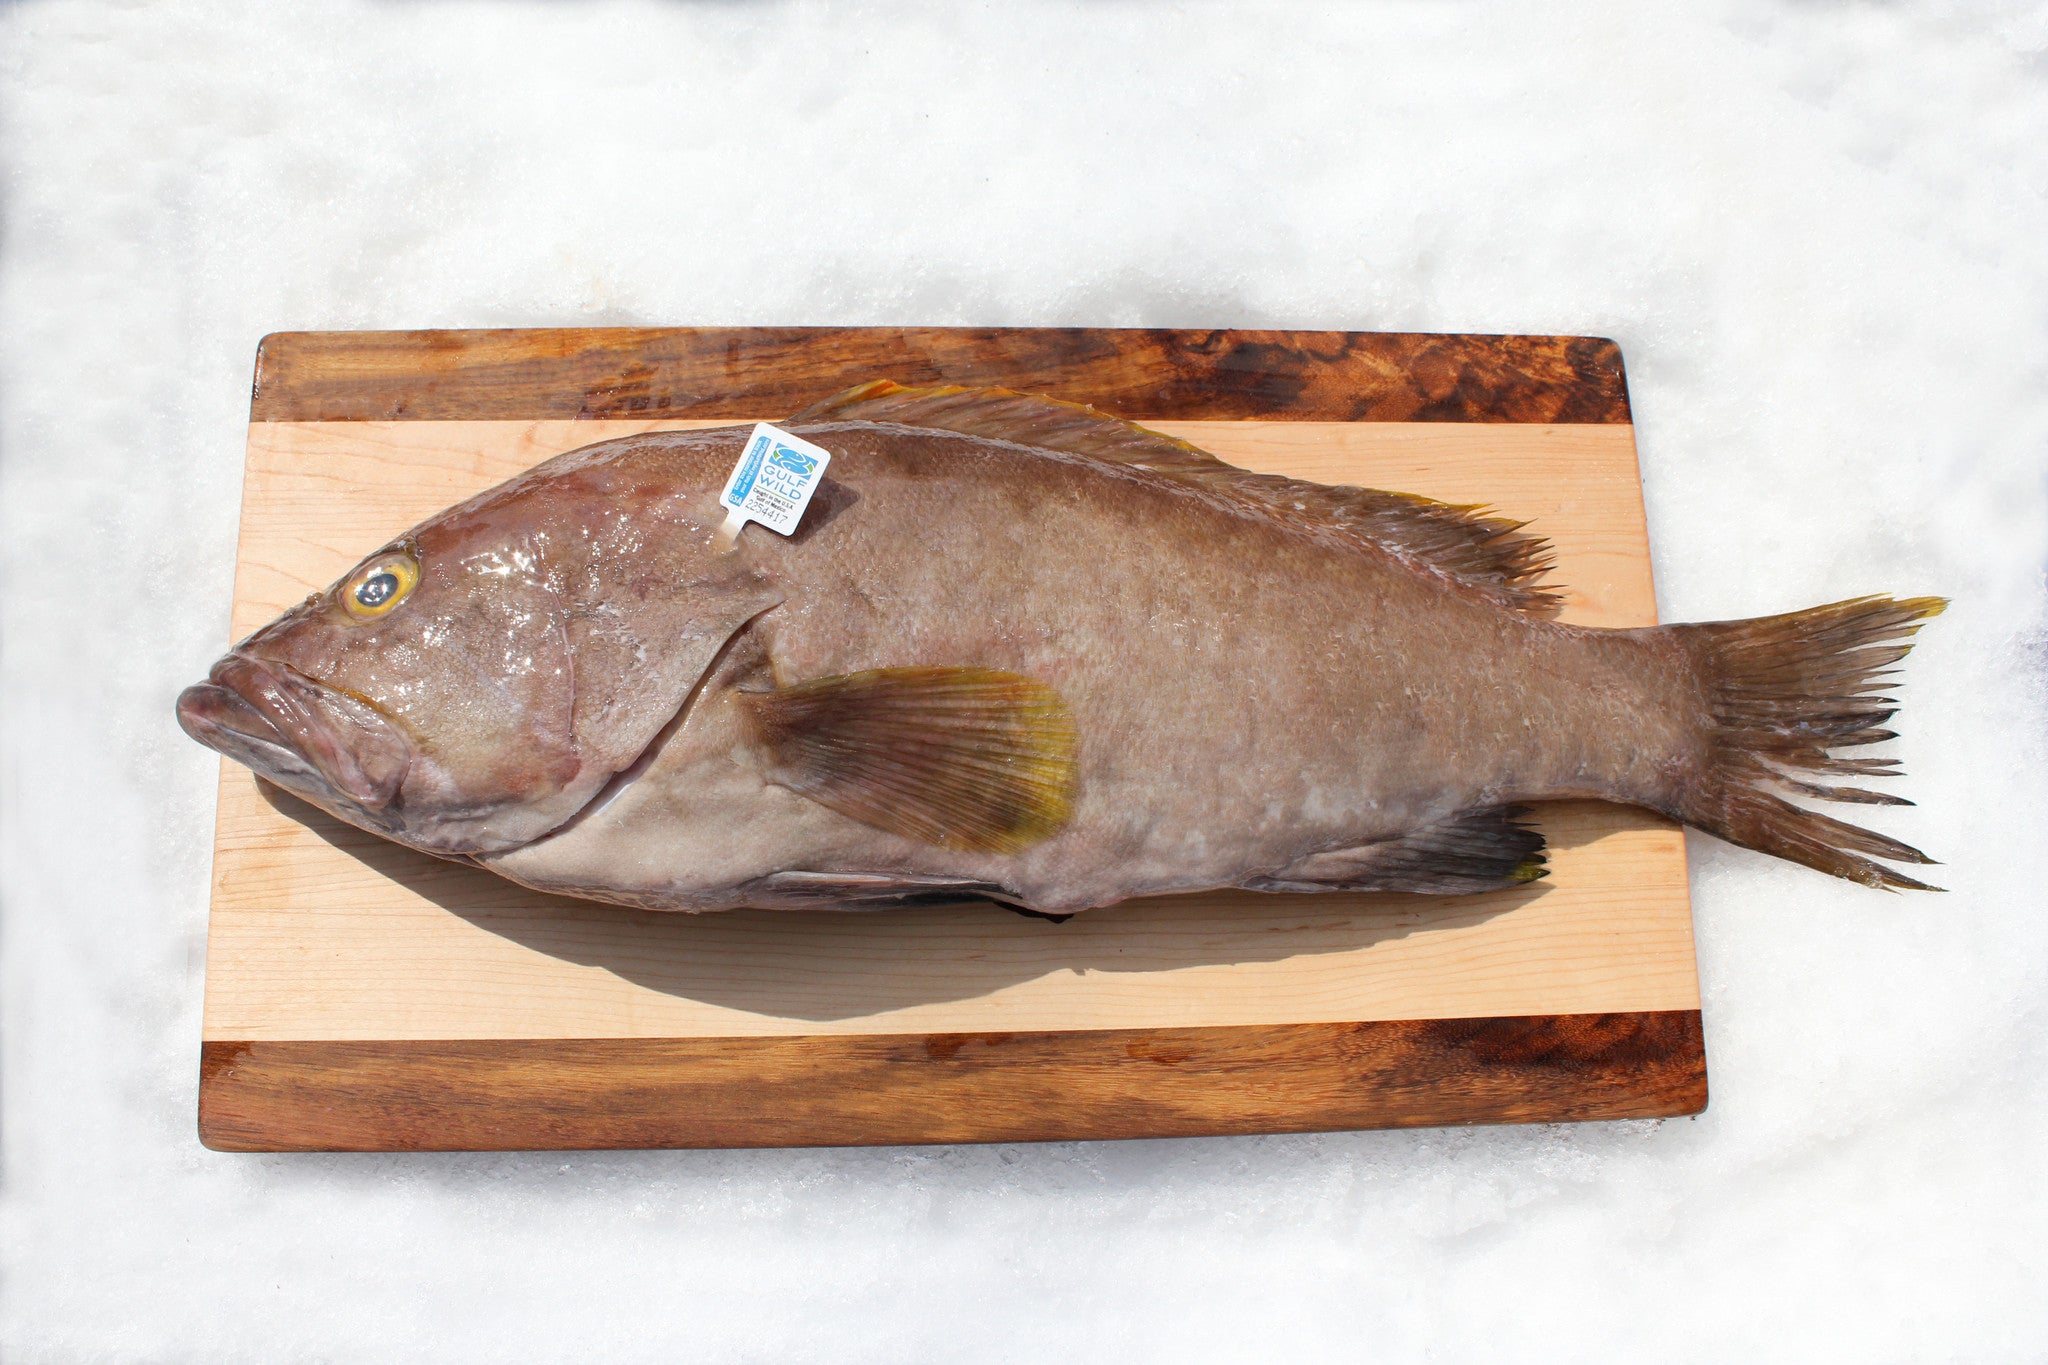 Red Snapper (Whole) - Katies Seafood Market